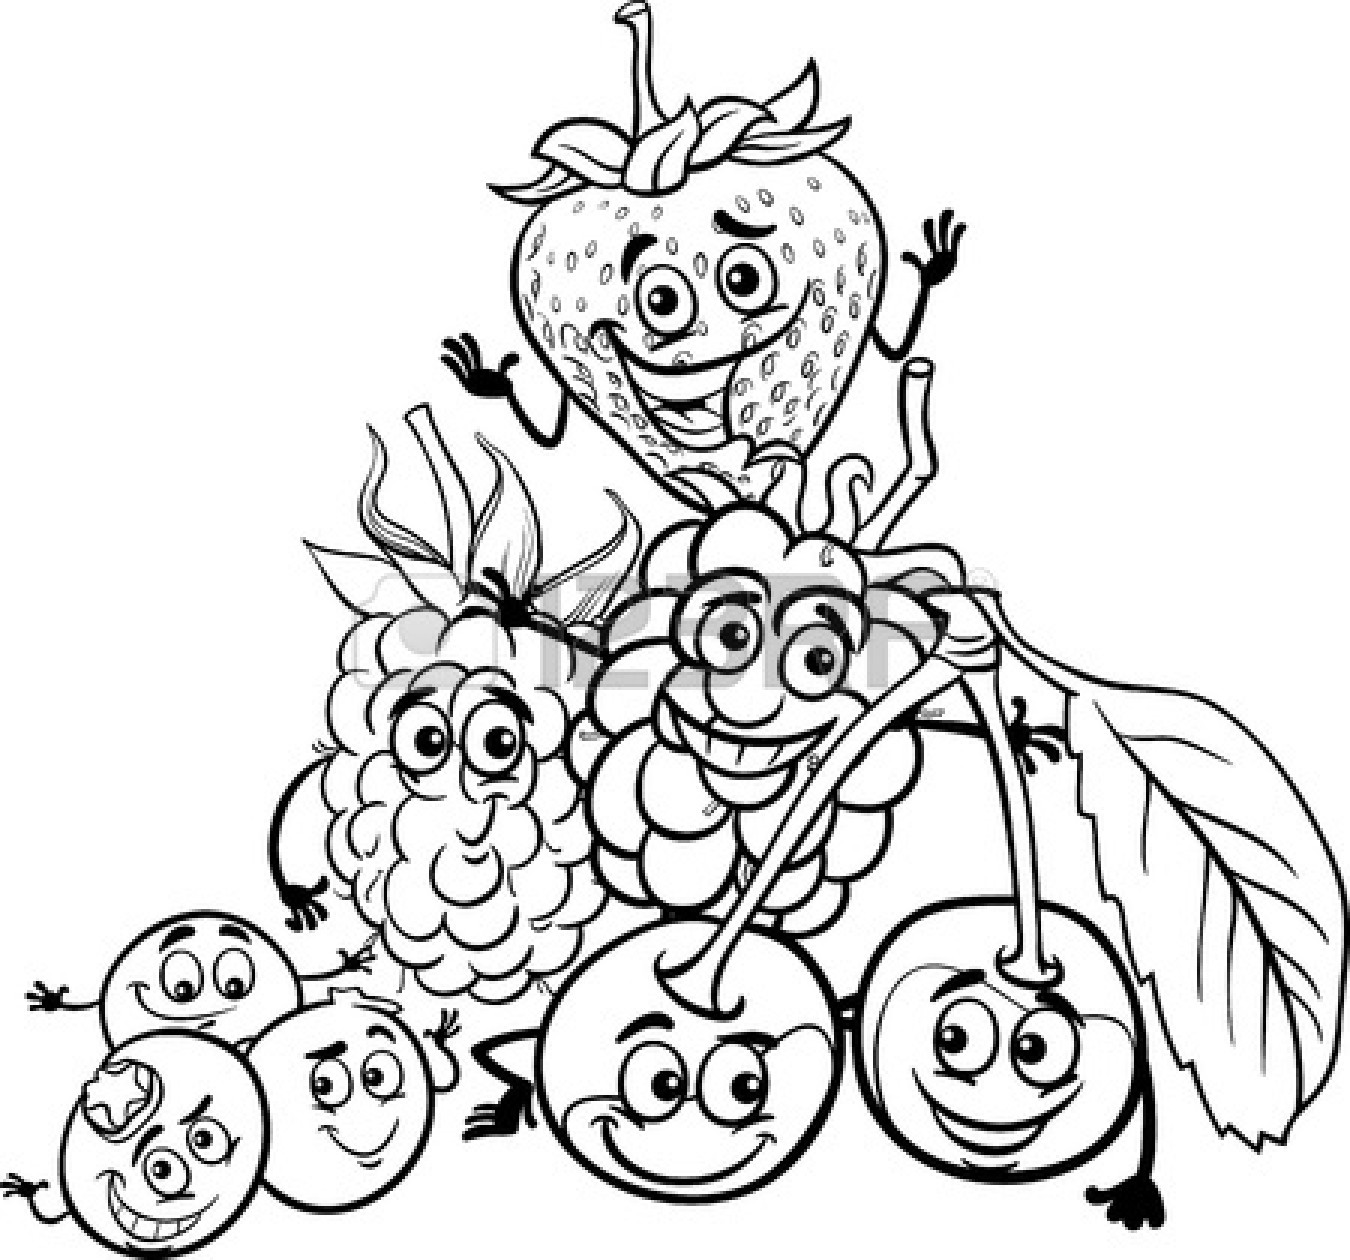 Vegetable Clipart Black And White   Clipart Panda   Free Clipart